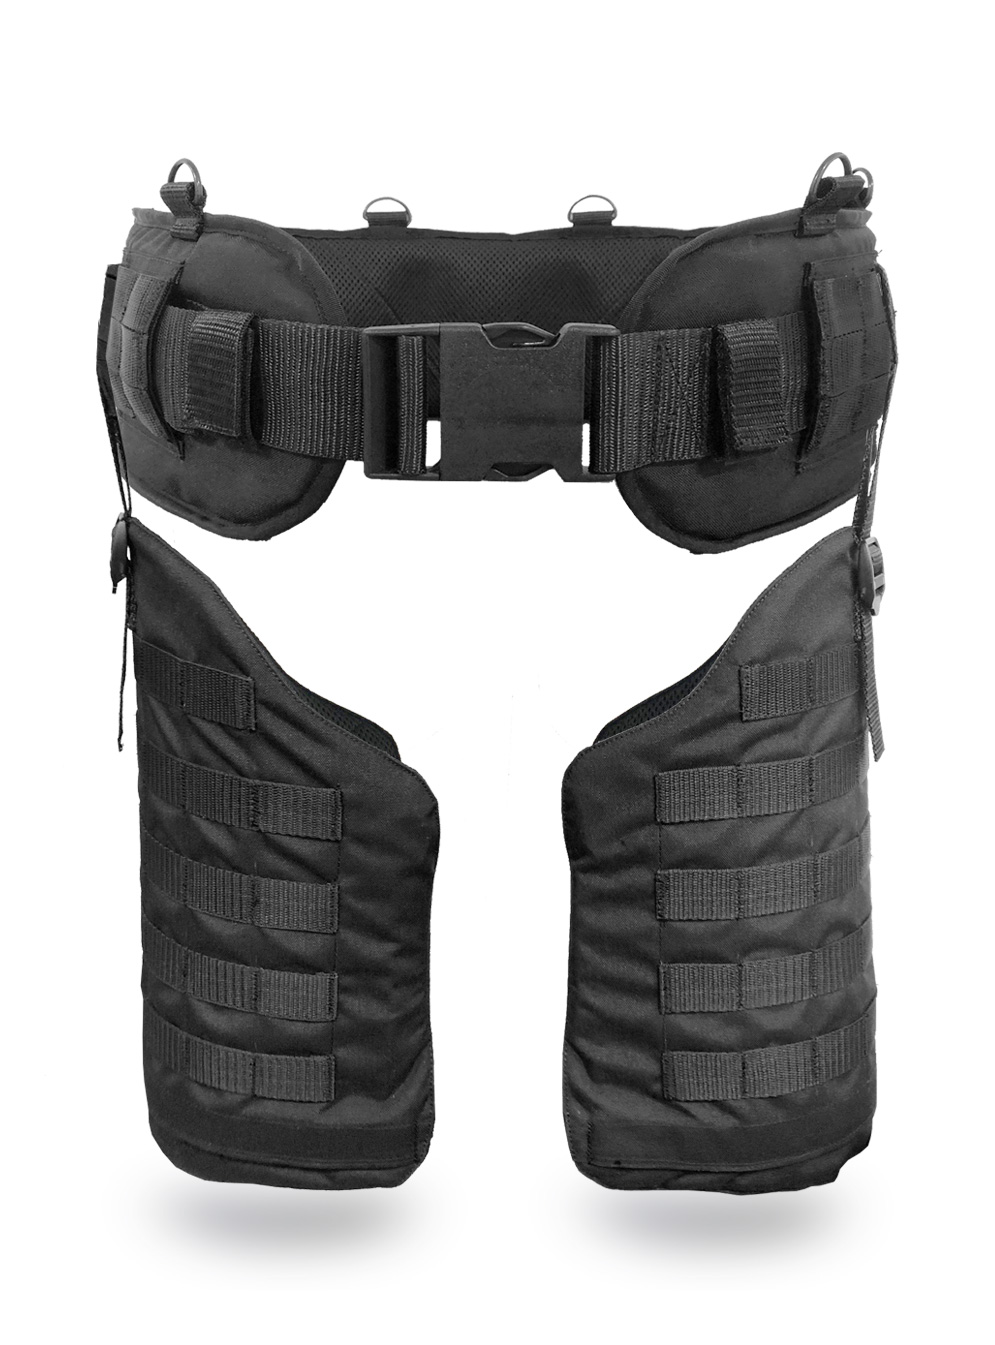 https://www.vestguard.co.uk/user/products/large/Belt-and-Thigh.jpg